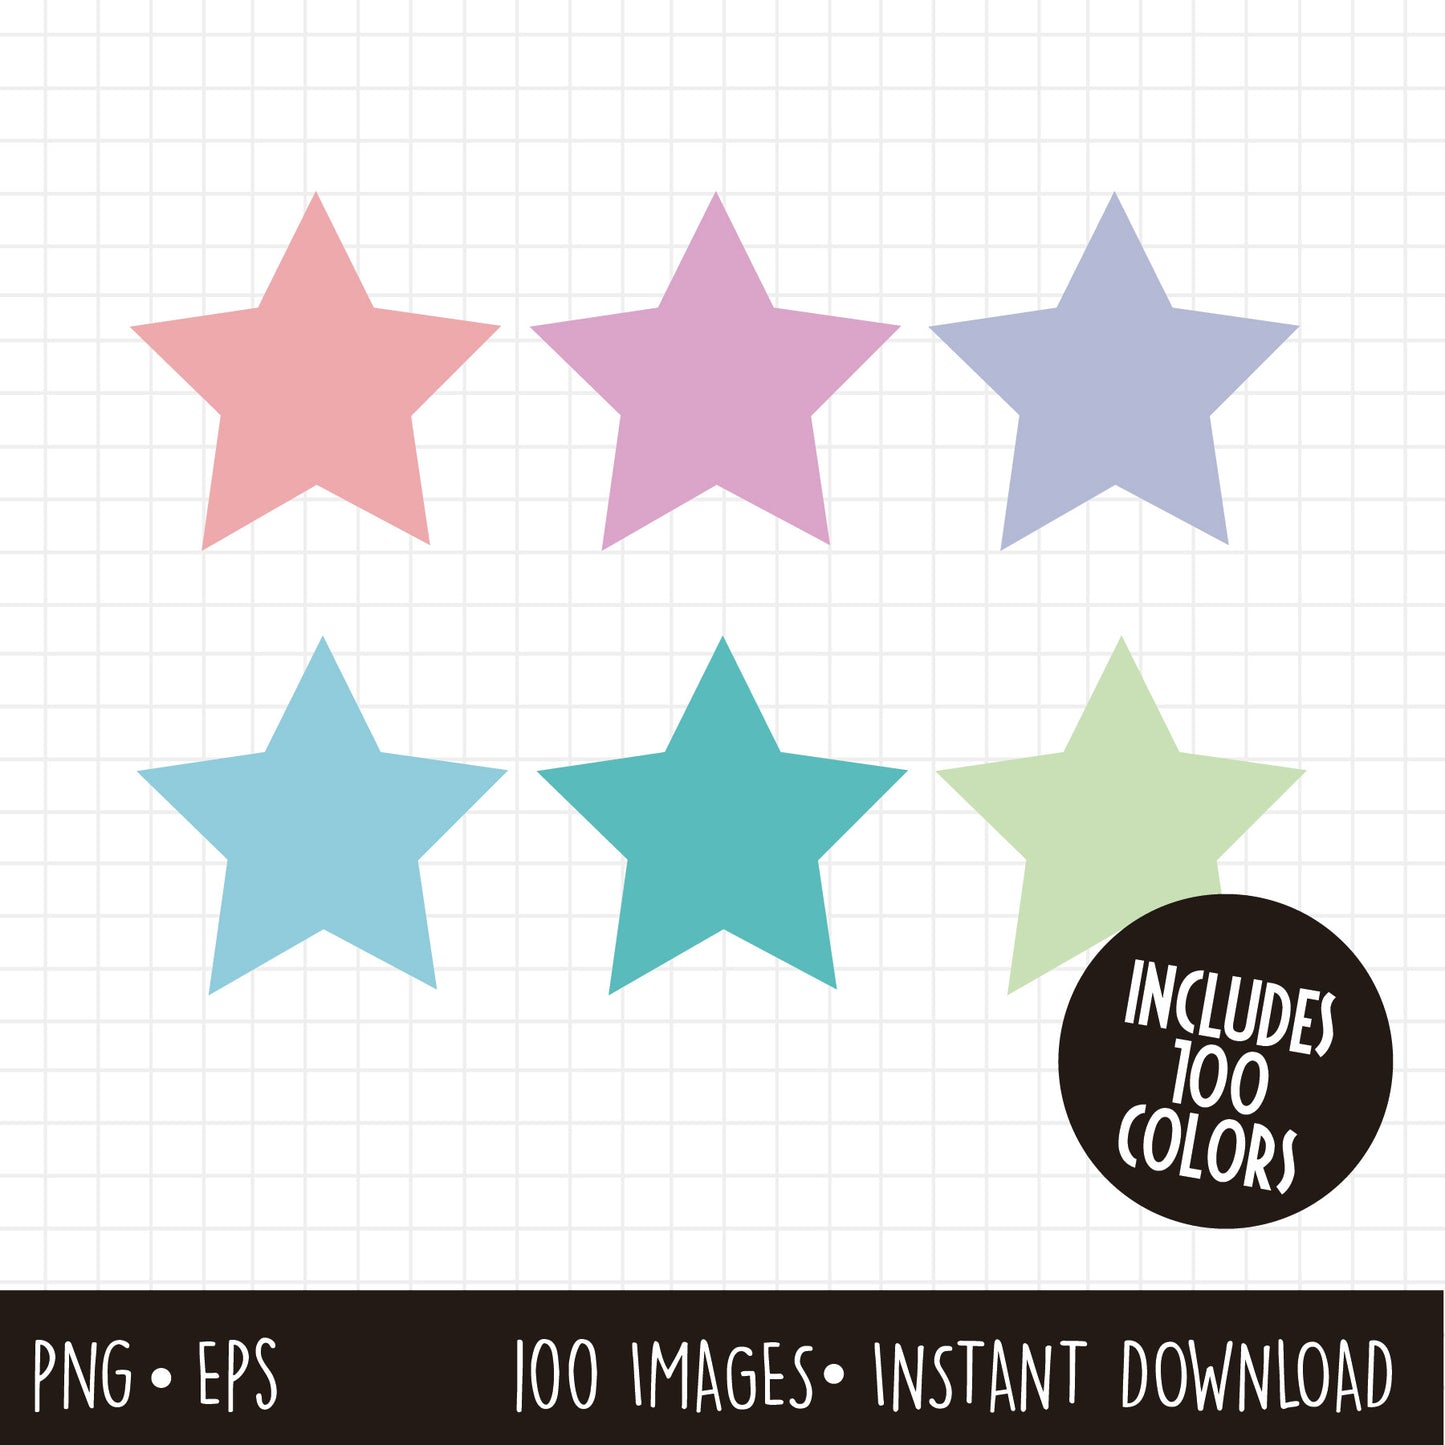 COD785 - 100 Stars Clip Art, Commercial Use Instant Download Star Graphic Clip Art Pack, Star Scrapbooking Planner Clip Art Pack